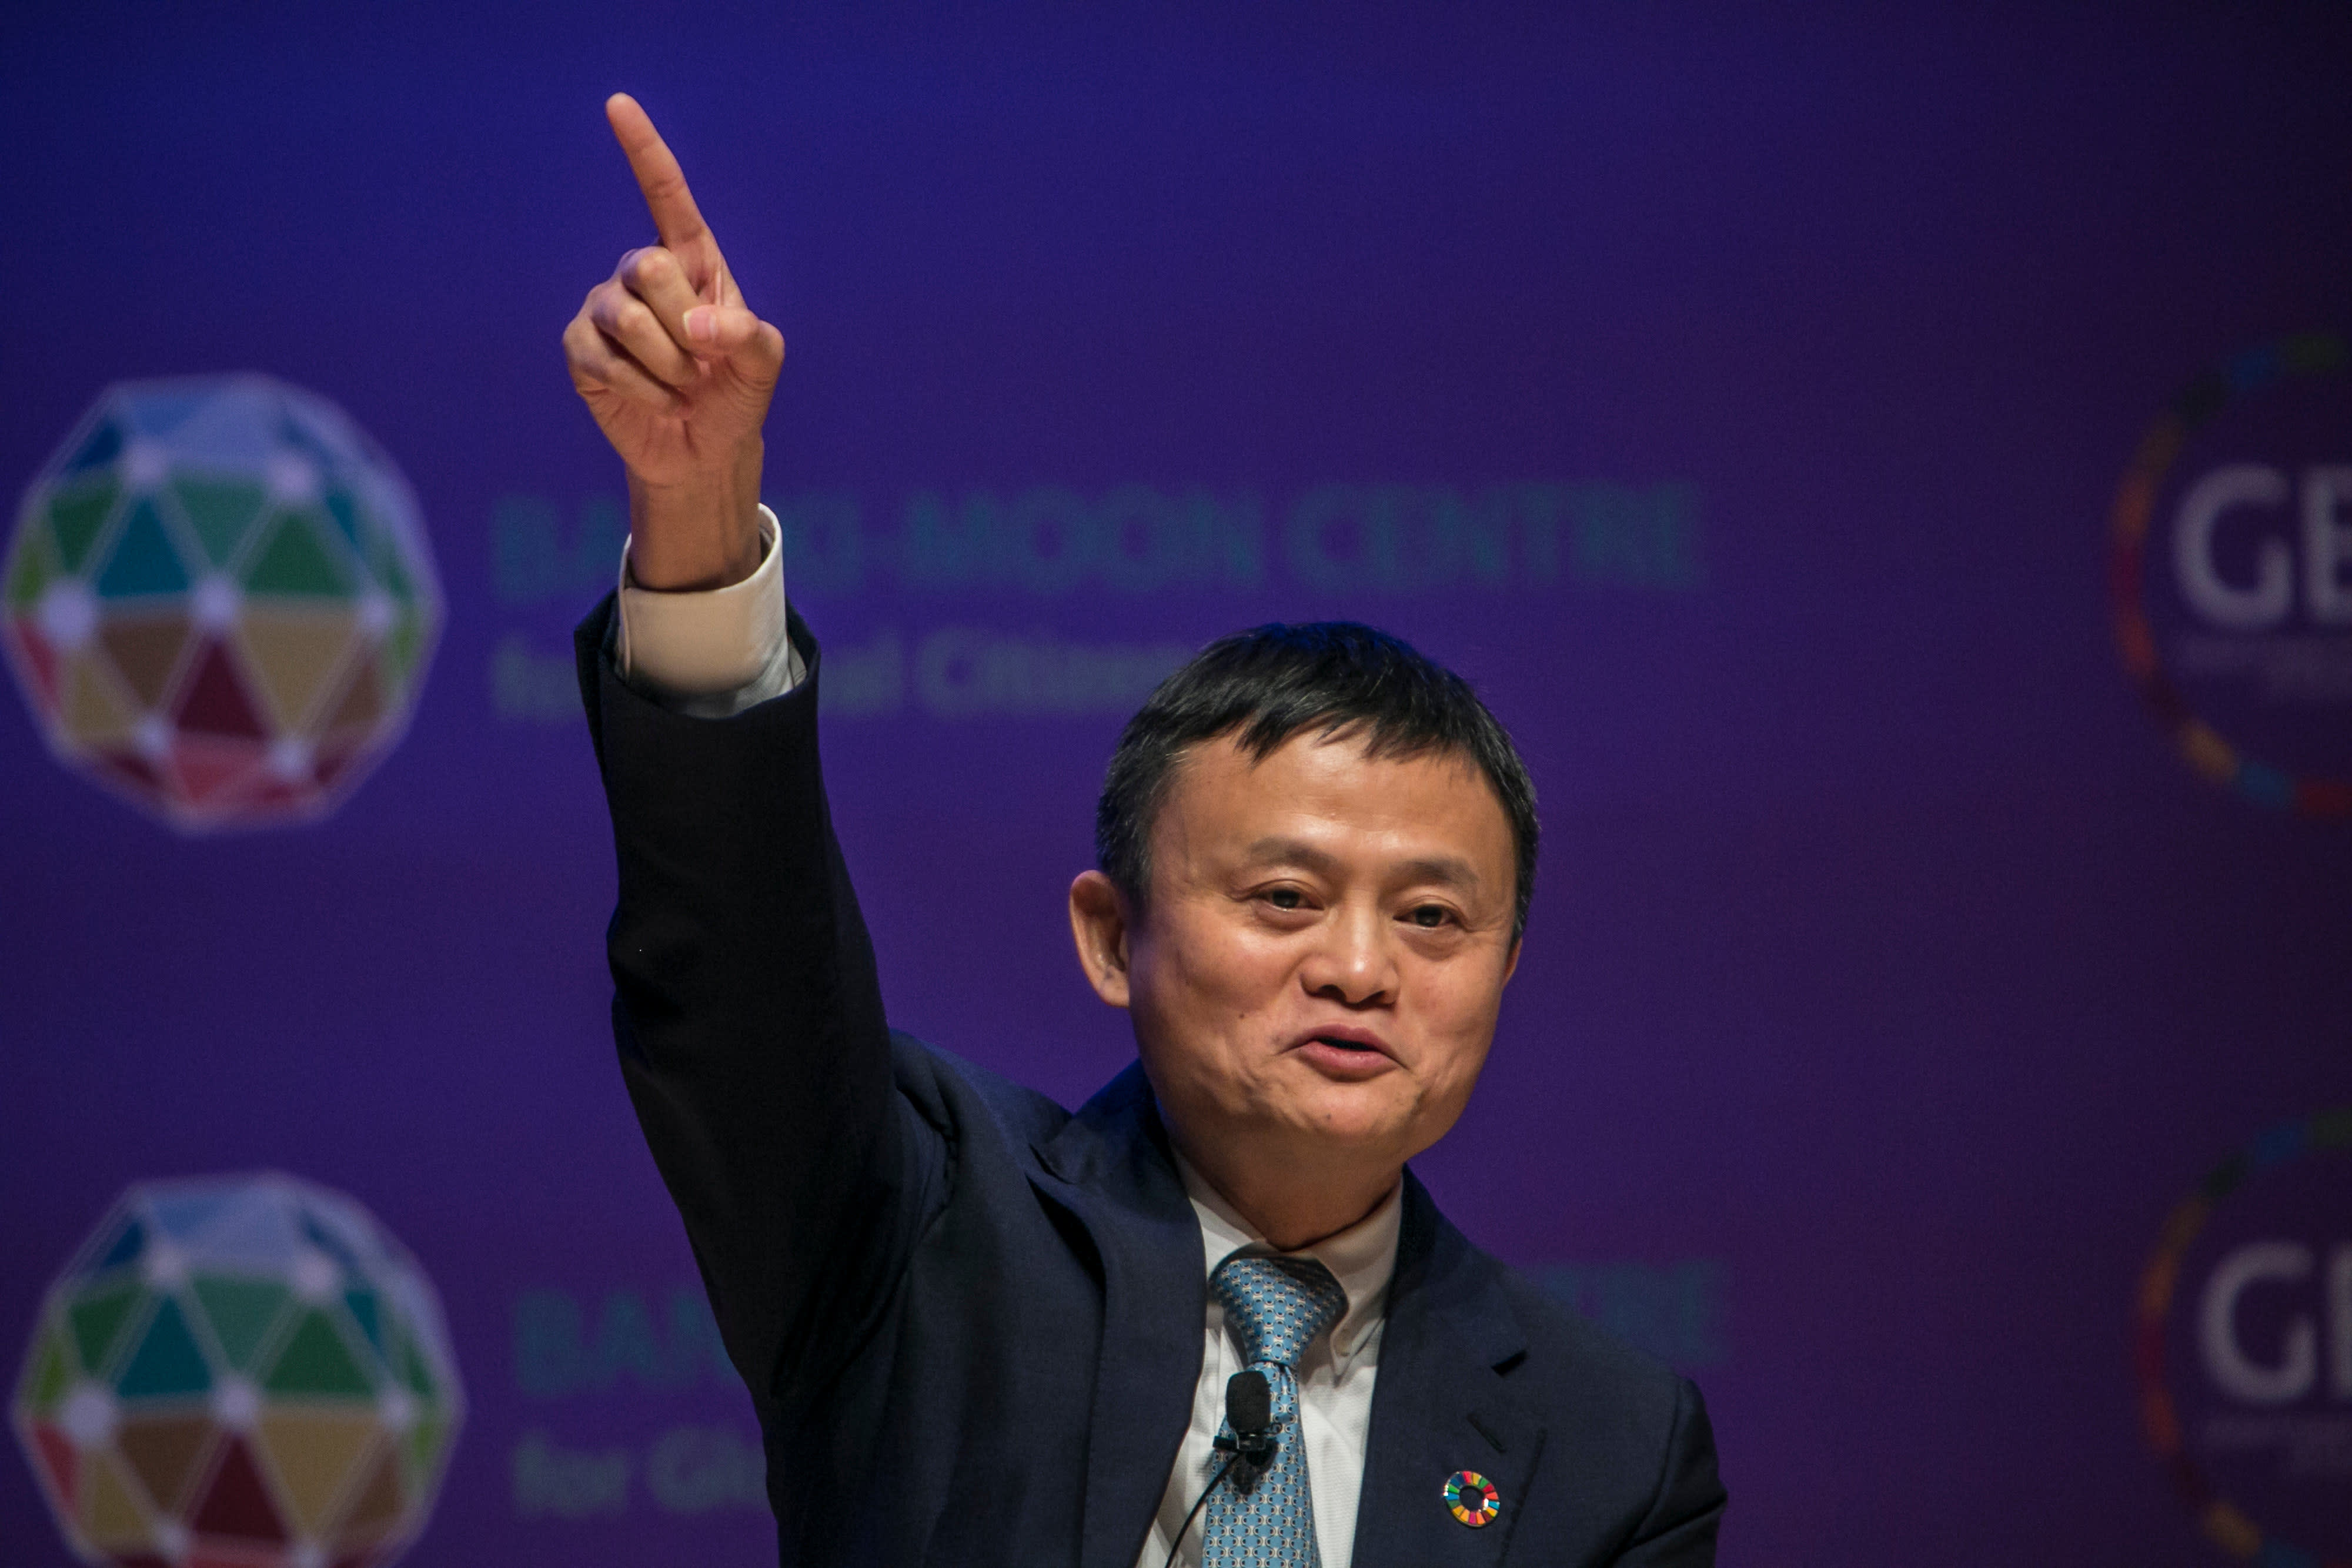 Beijing appears to be relaxing its scrutiny of giants such as Alibaba